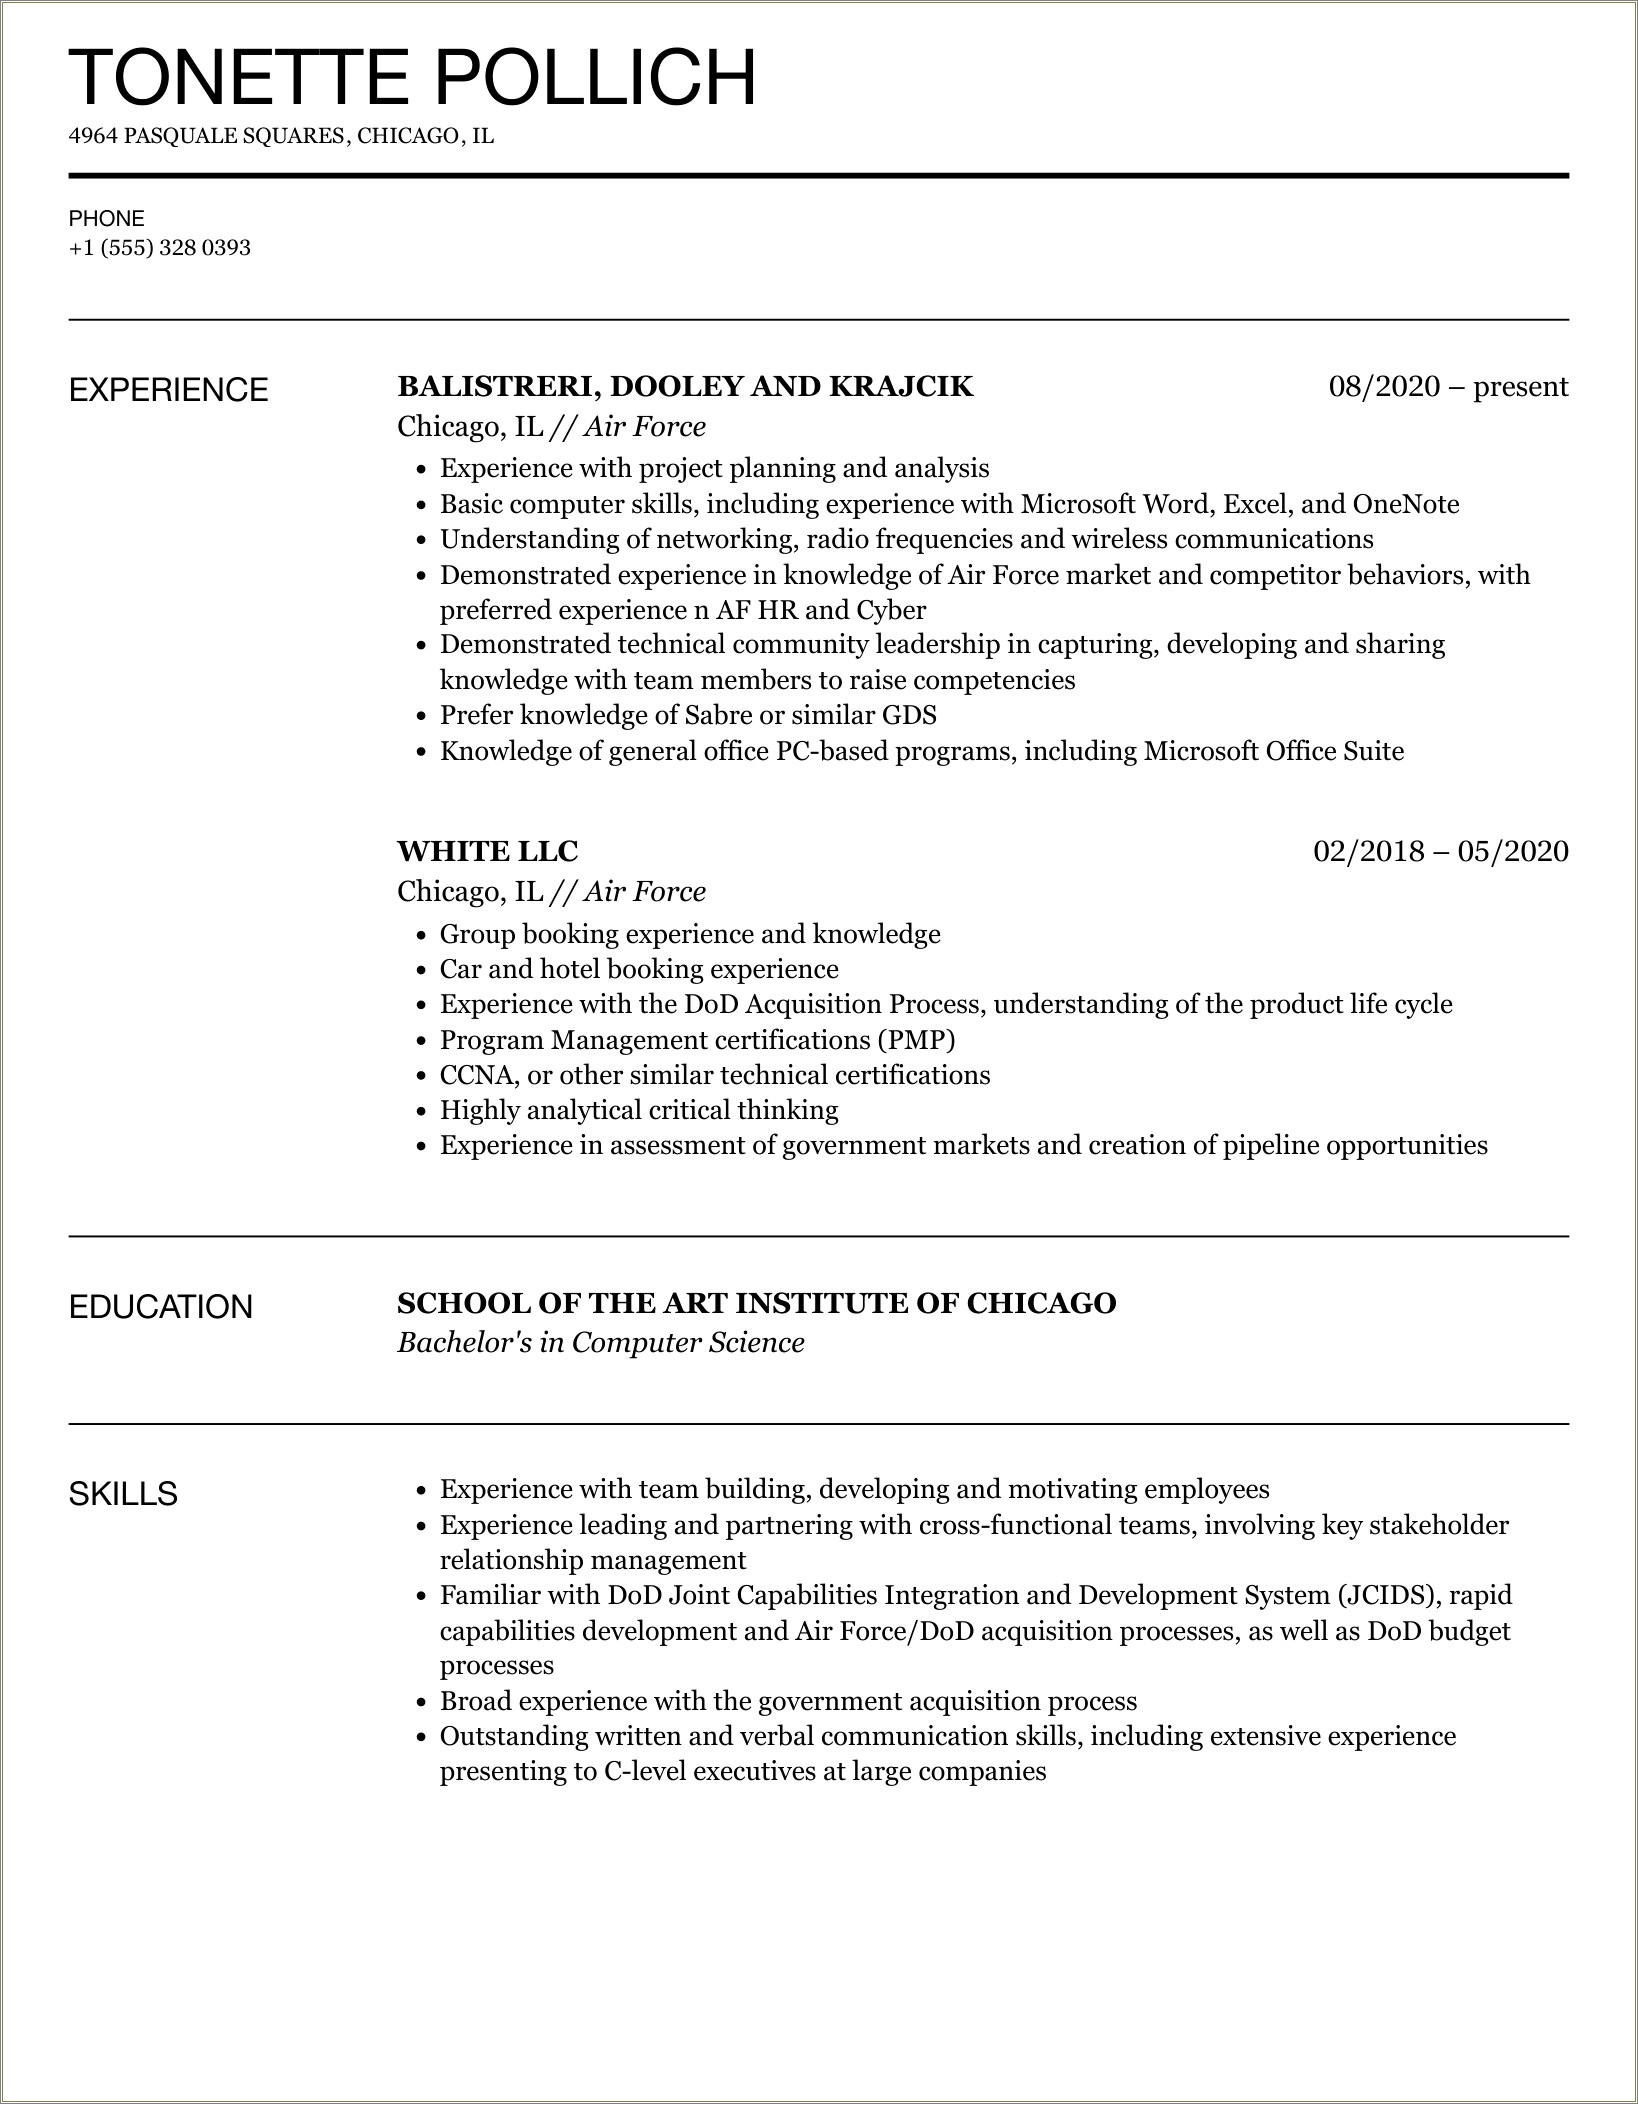 Listing Marine Corps Experience On A Resume